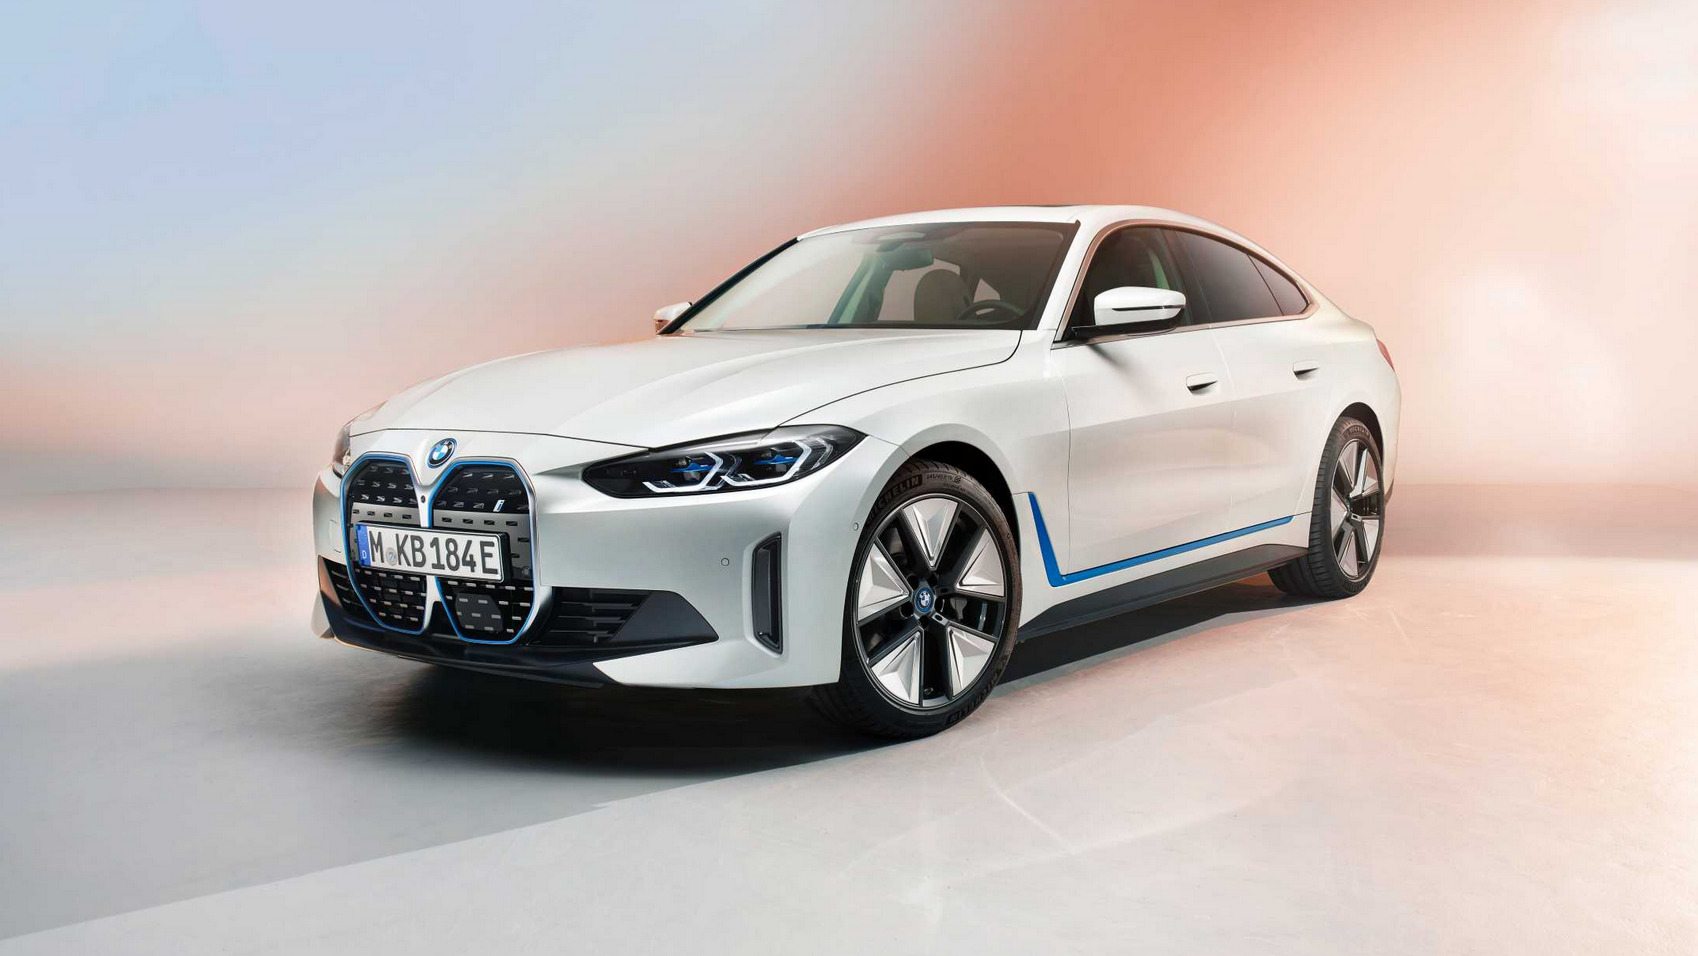 BMW looks into the future and shows new i4